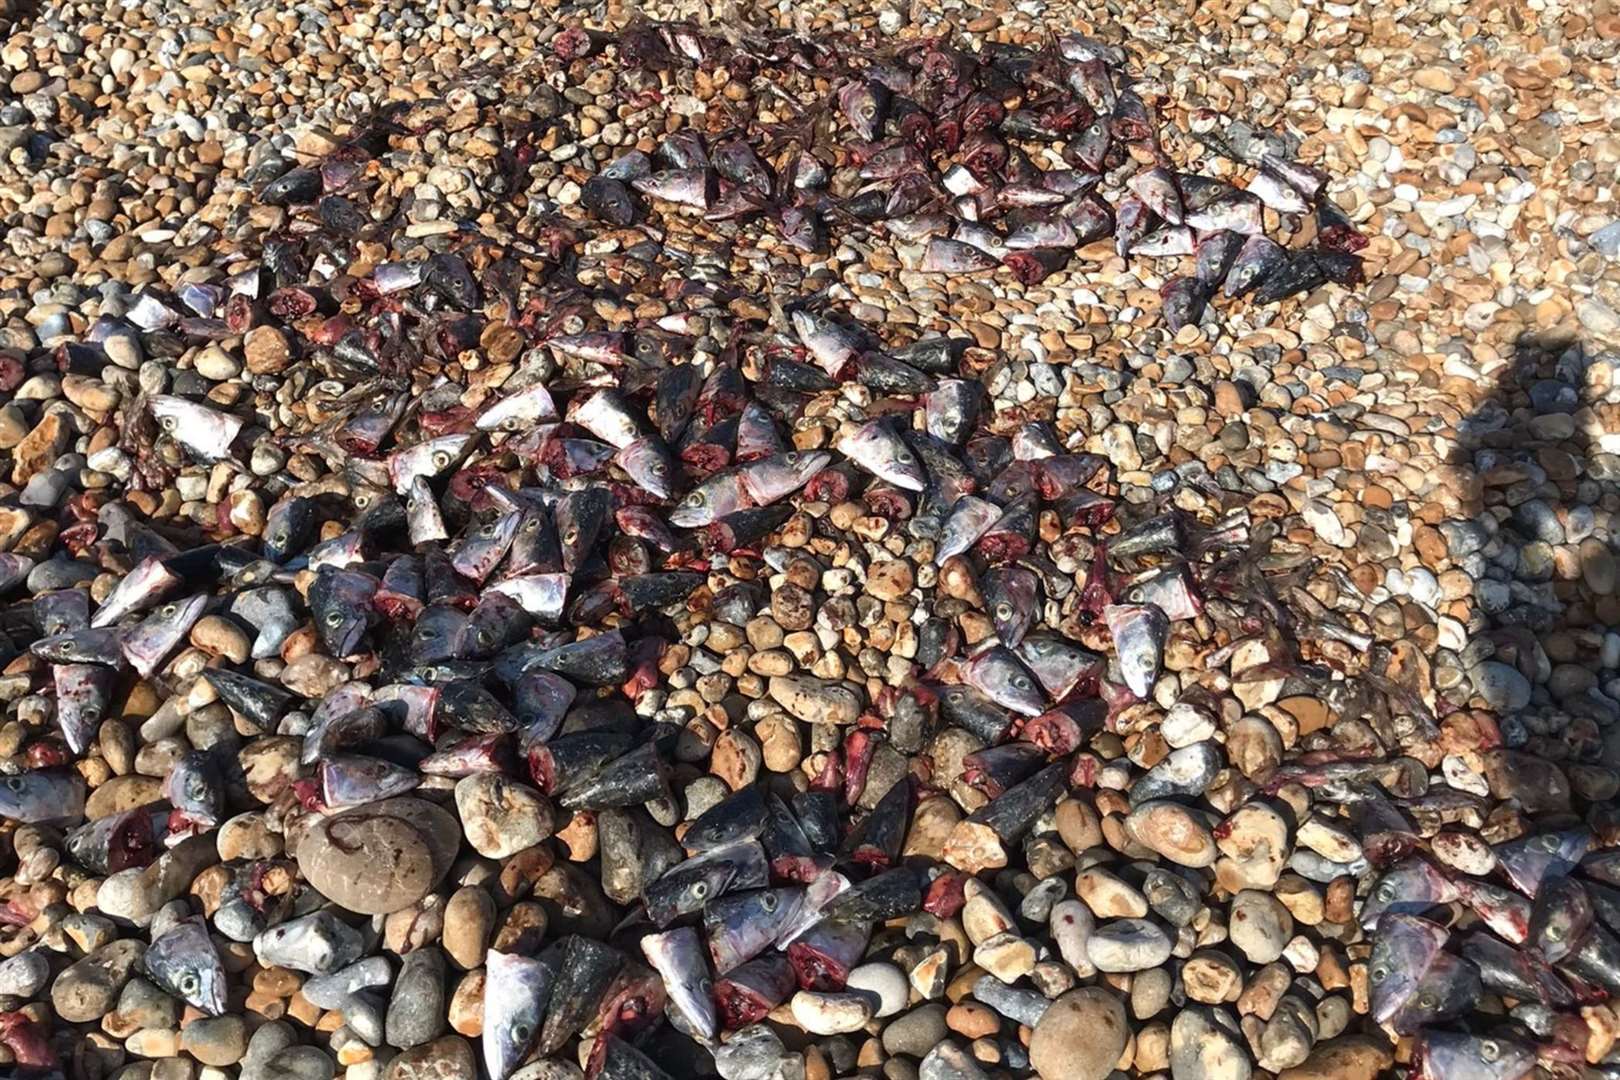 A pile of severed fish heads has been found on Dungeness beach. Photo: Owen Leyshon